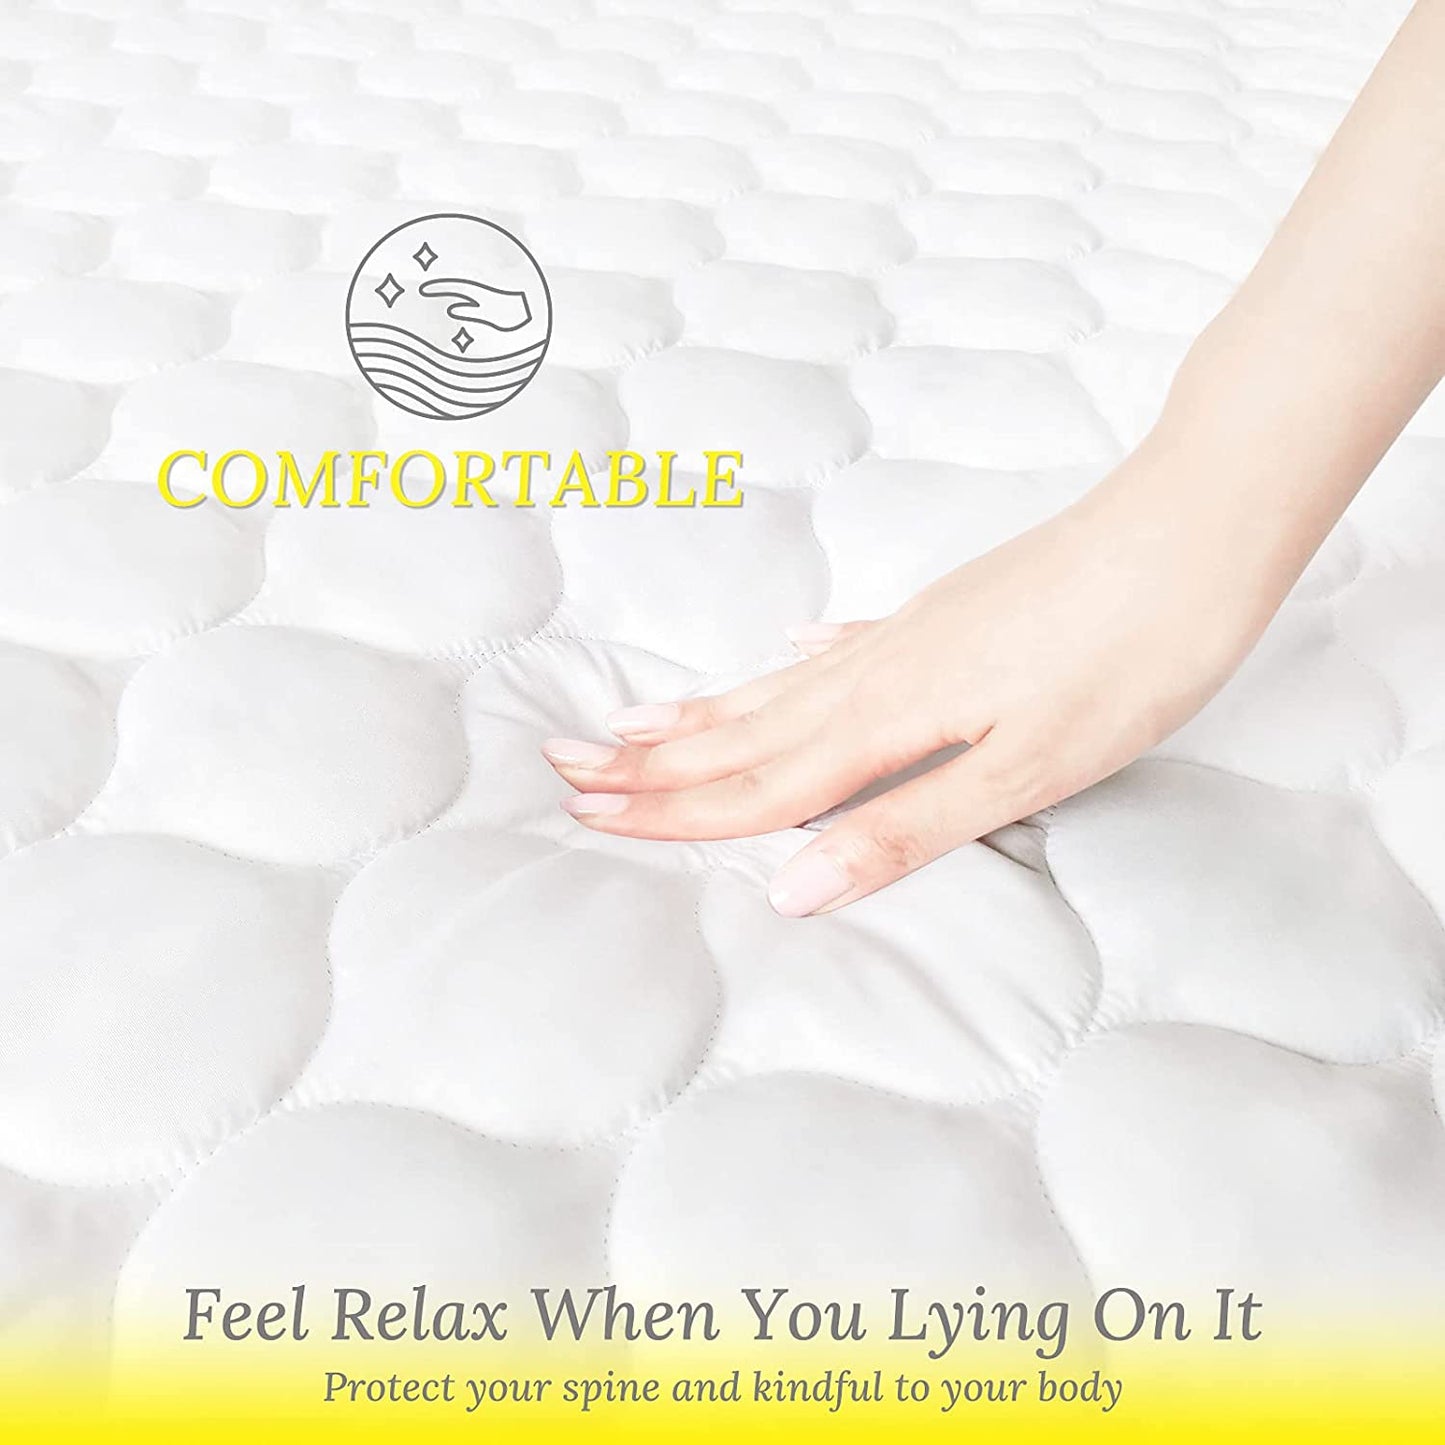 Ayolkhill 100% Waterproof Mattress Pad Queen Size,Breathable Quilted Fitted Fiber Mattress Cover Noiseless,Washable Cooling Mattress Pad with 14-21" Stretchable Deep Pocket